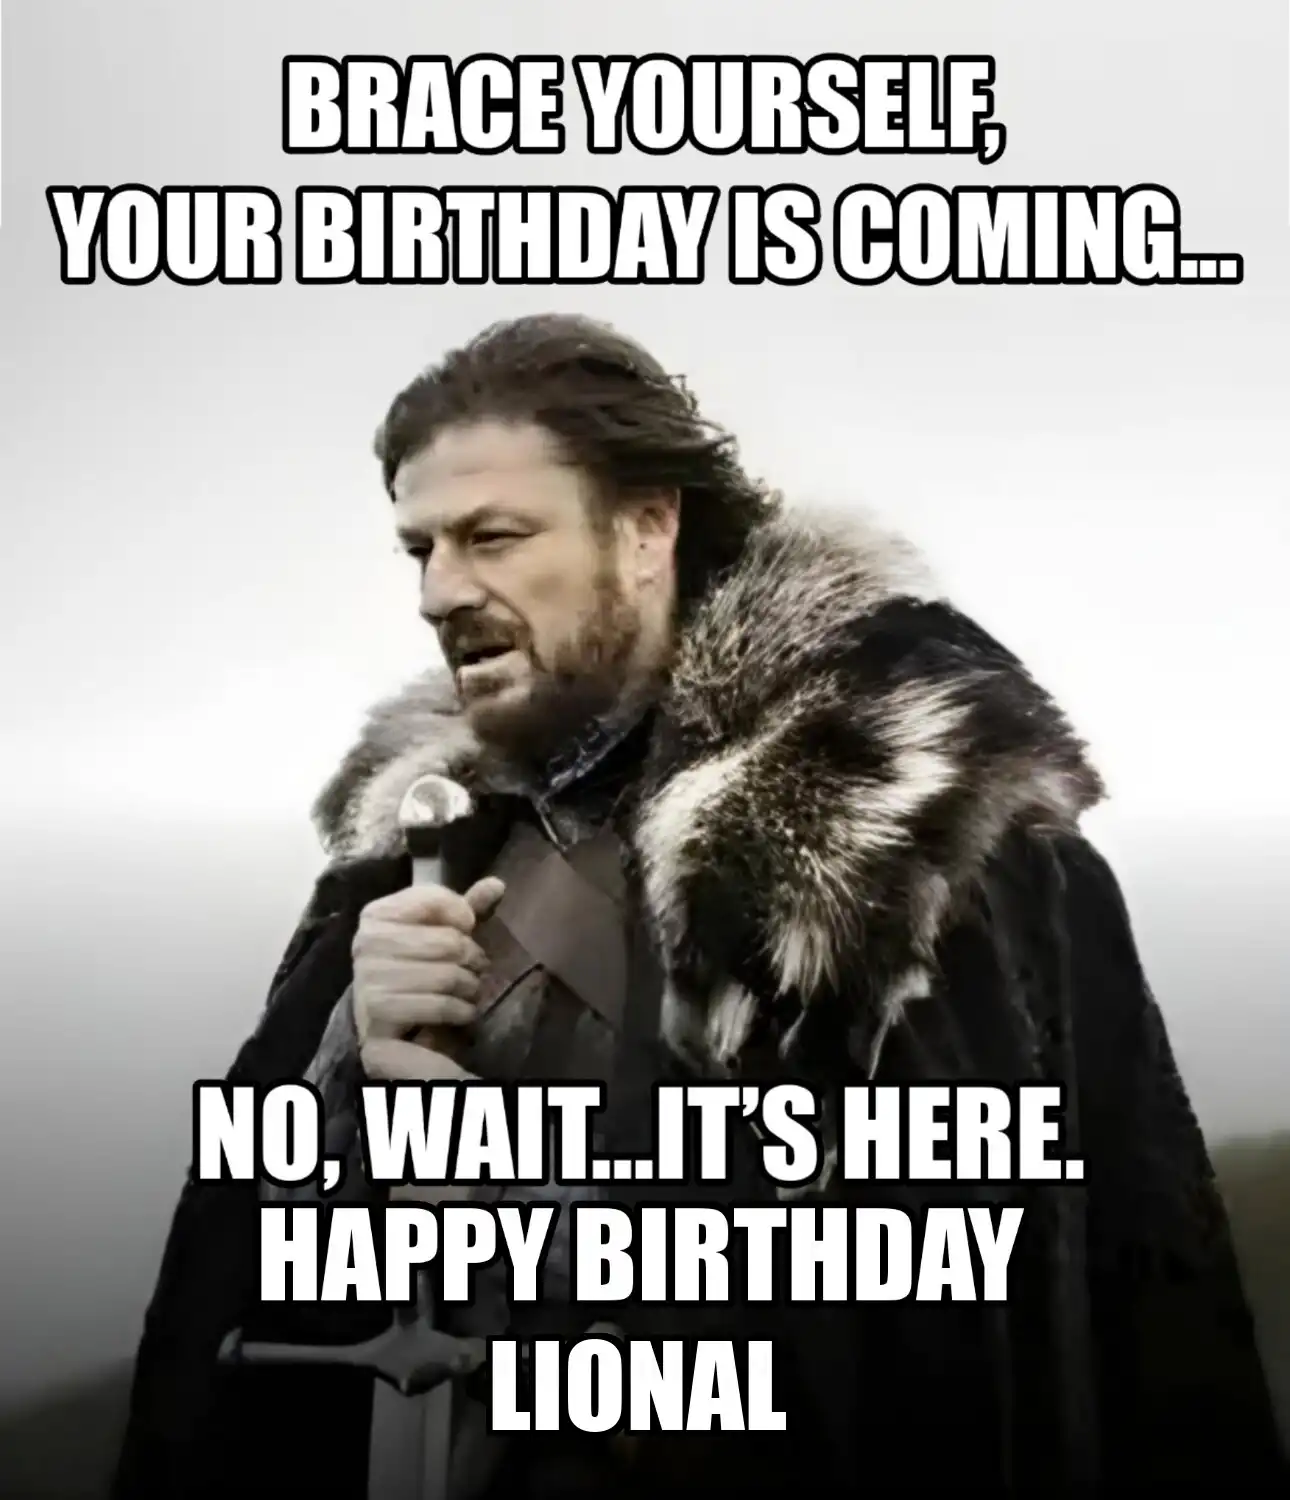 Happy Birthday Lional Brace Yourself Your Birthday Is Coming Meme